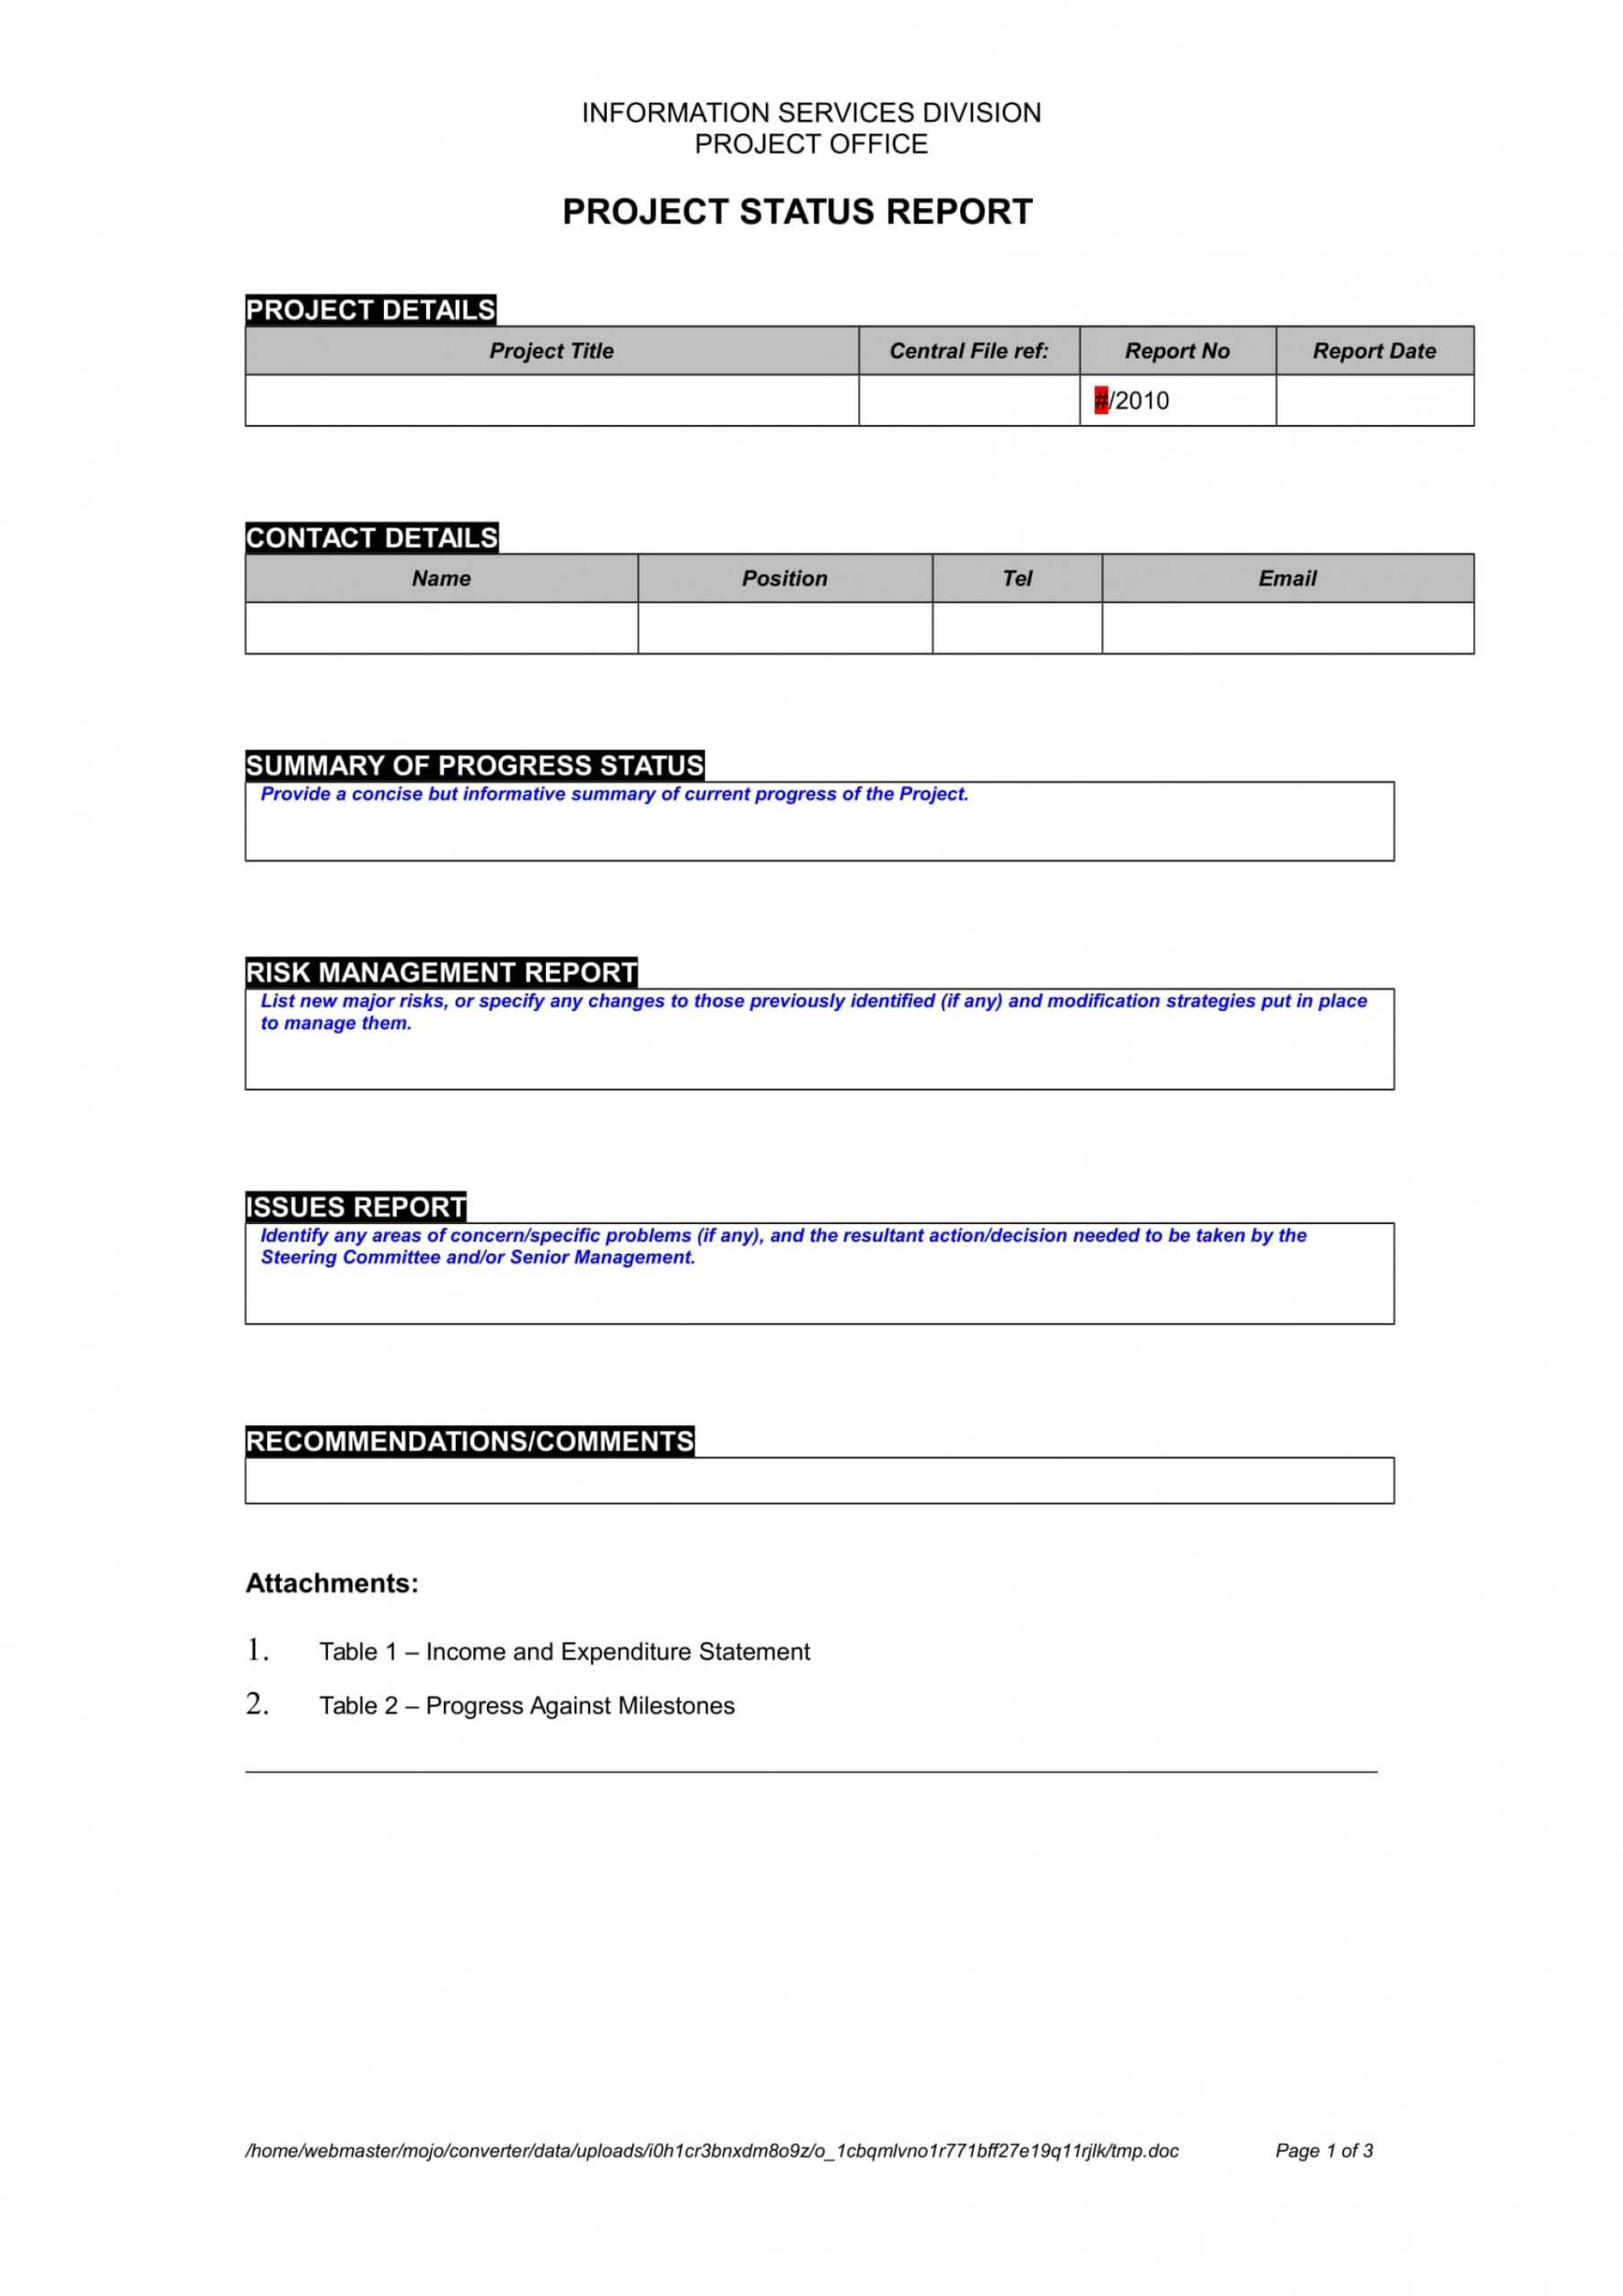 Project Status Report Template Word 2010 - Zohre With Project Status Report Template Word 2010